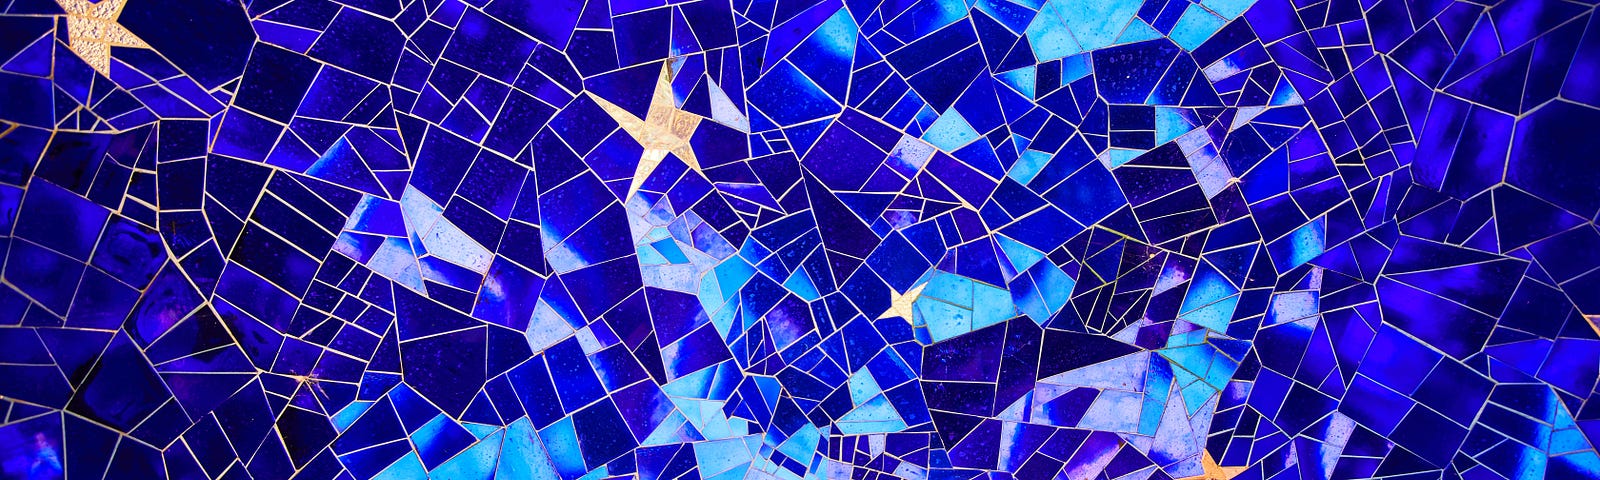 Splintered tile mosaic in shades of blue with stars and crescent moon.